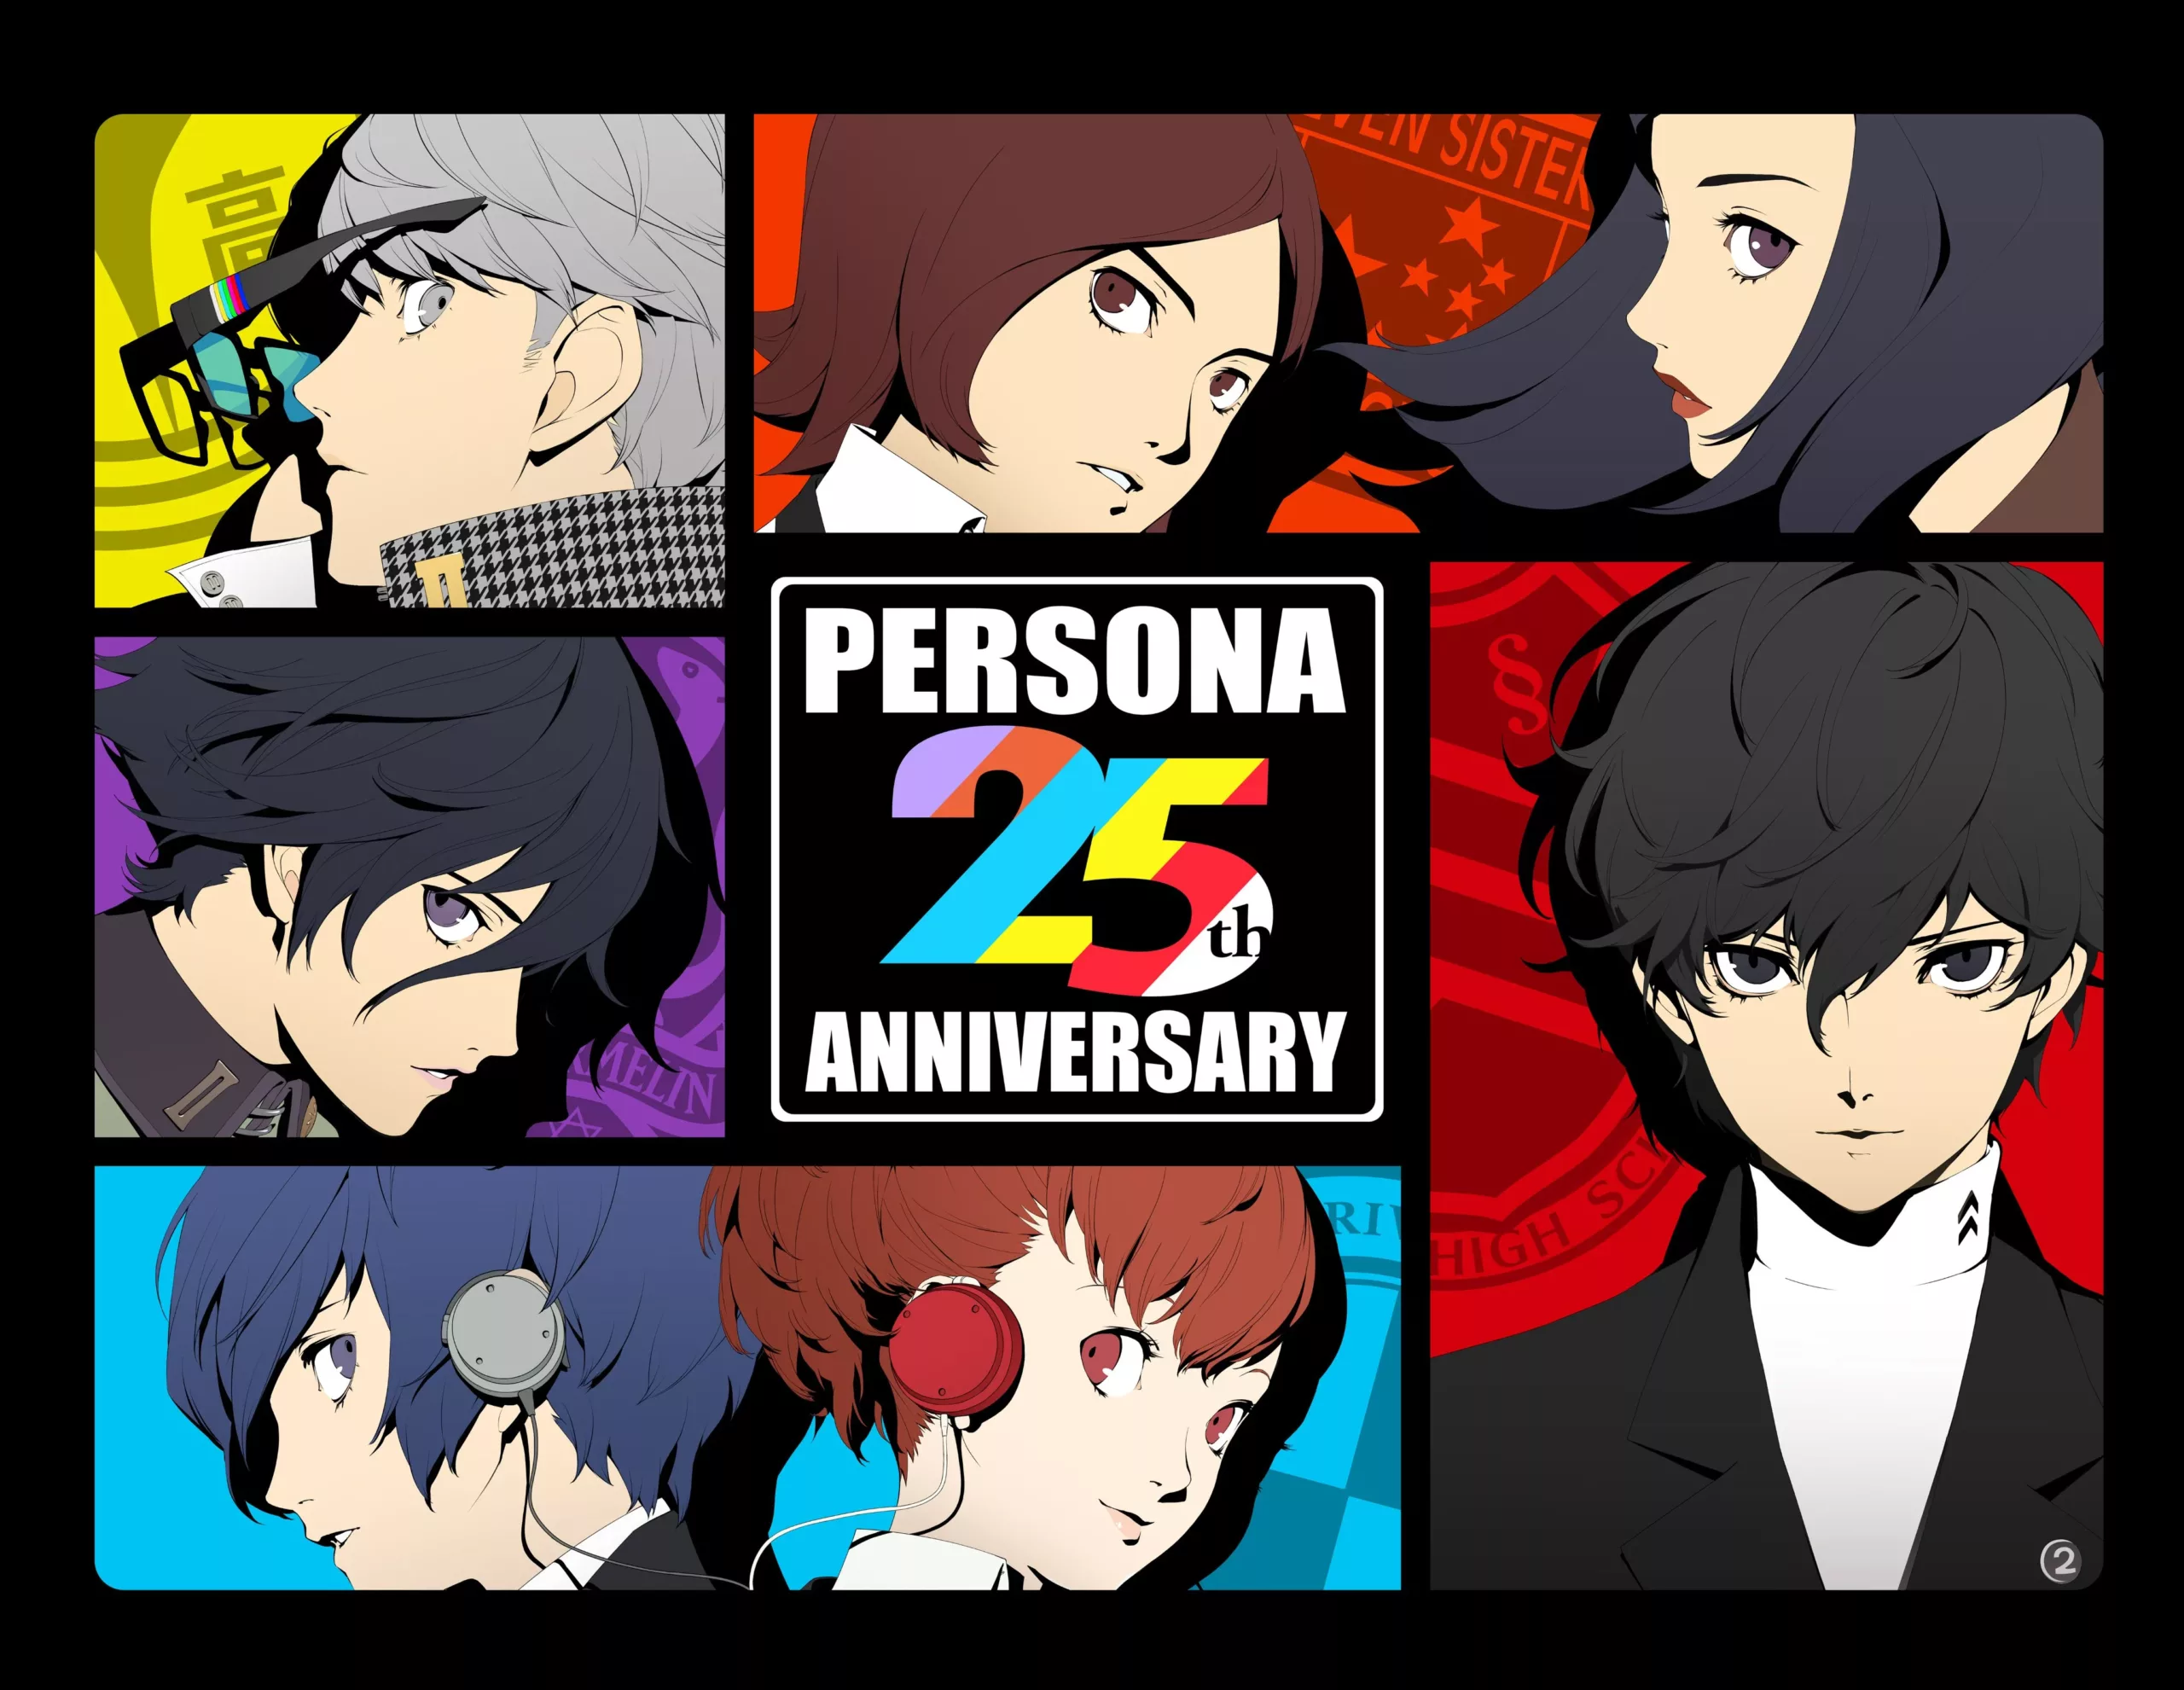 Key art for the "Persona 25th Anniversary", showing the protagonists of the first five games. The "25th" in the logo is formed from six coloured stripes.